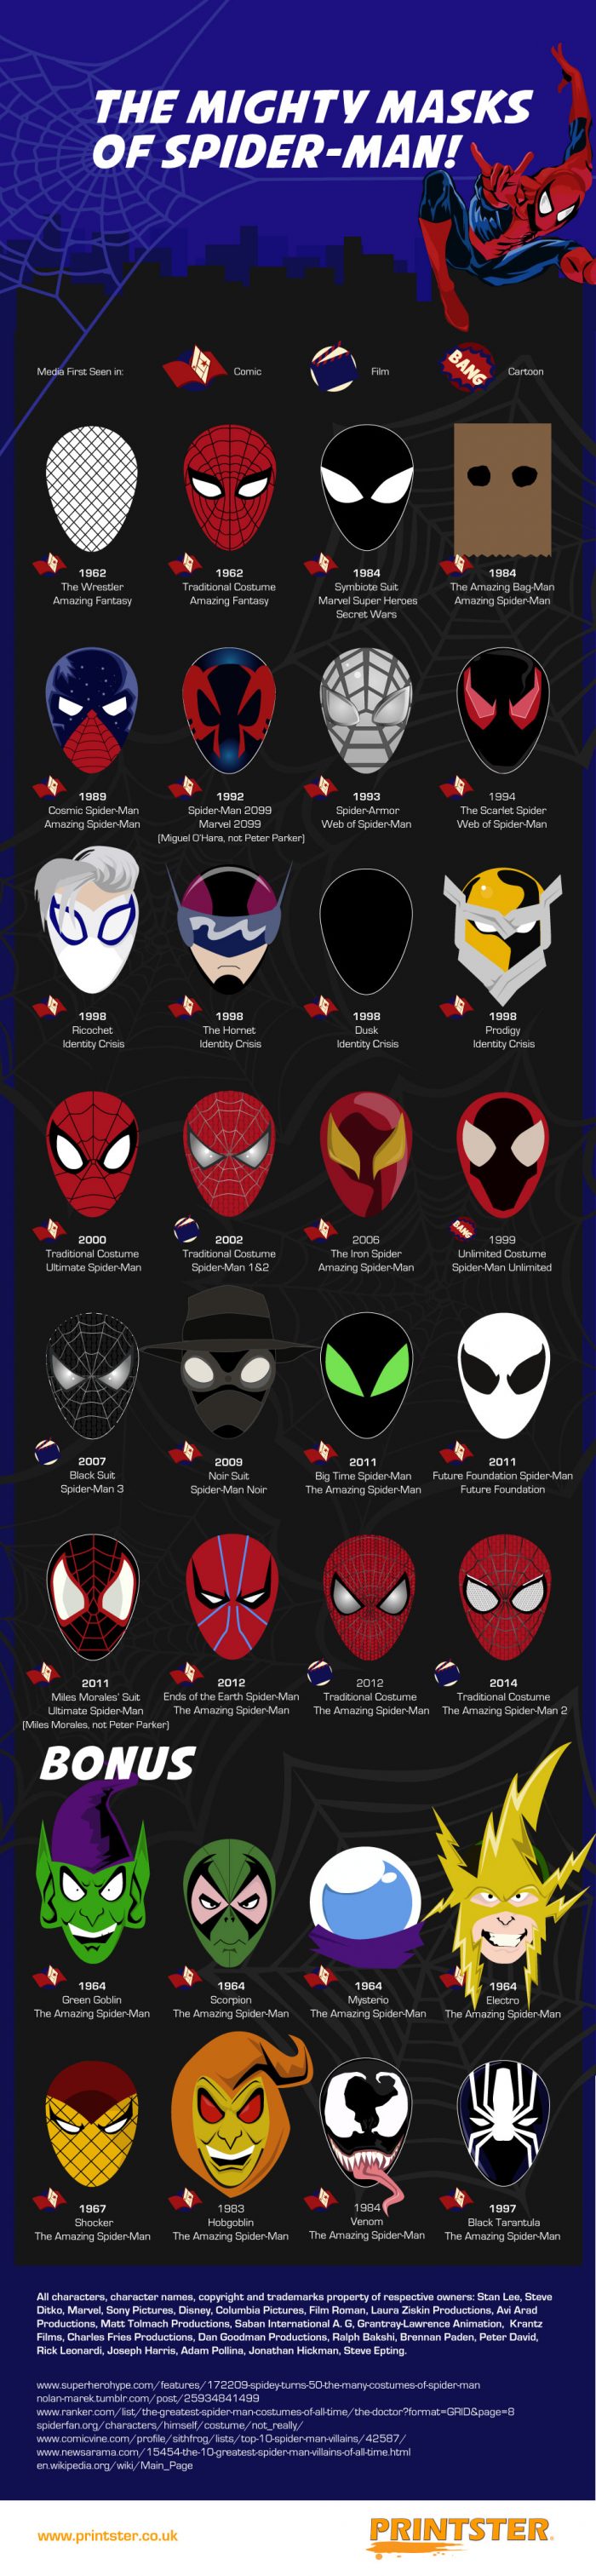 The Mighty Masks of Spider- Man!